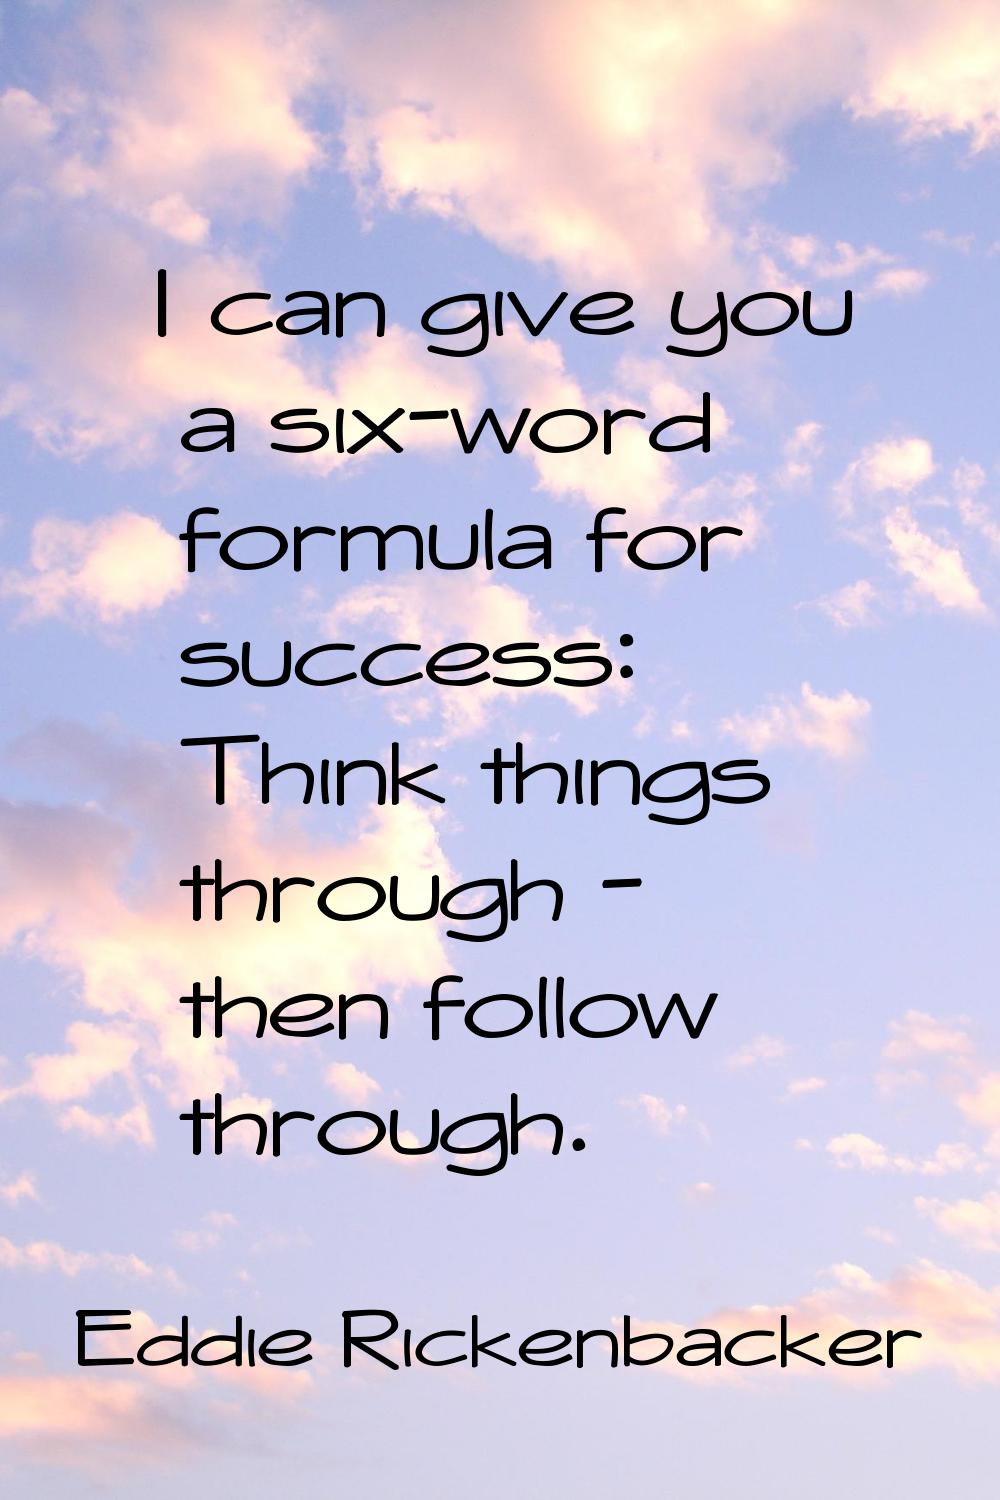 I can give you a six-word formula for success: Think things through - then follow through.